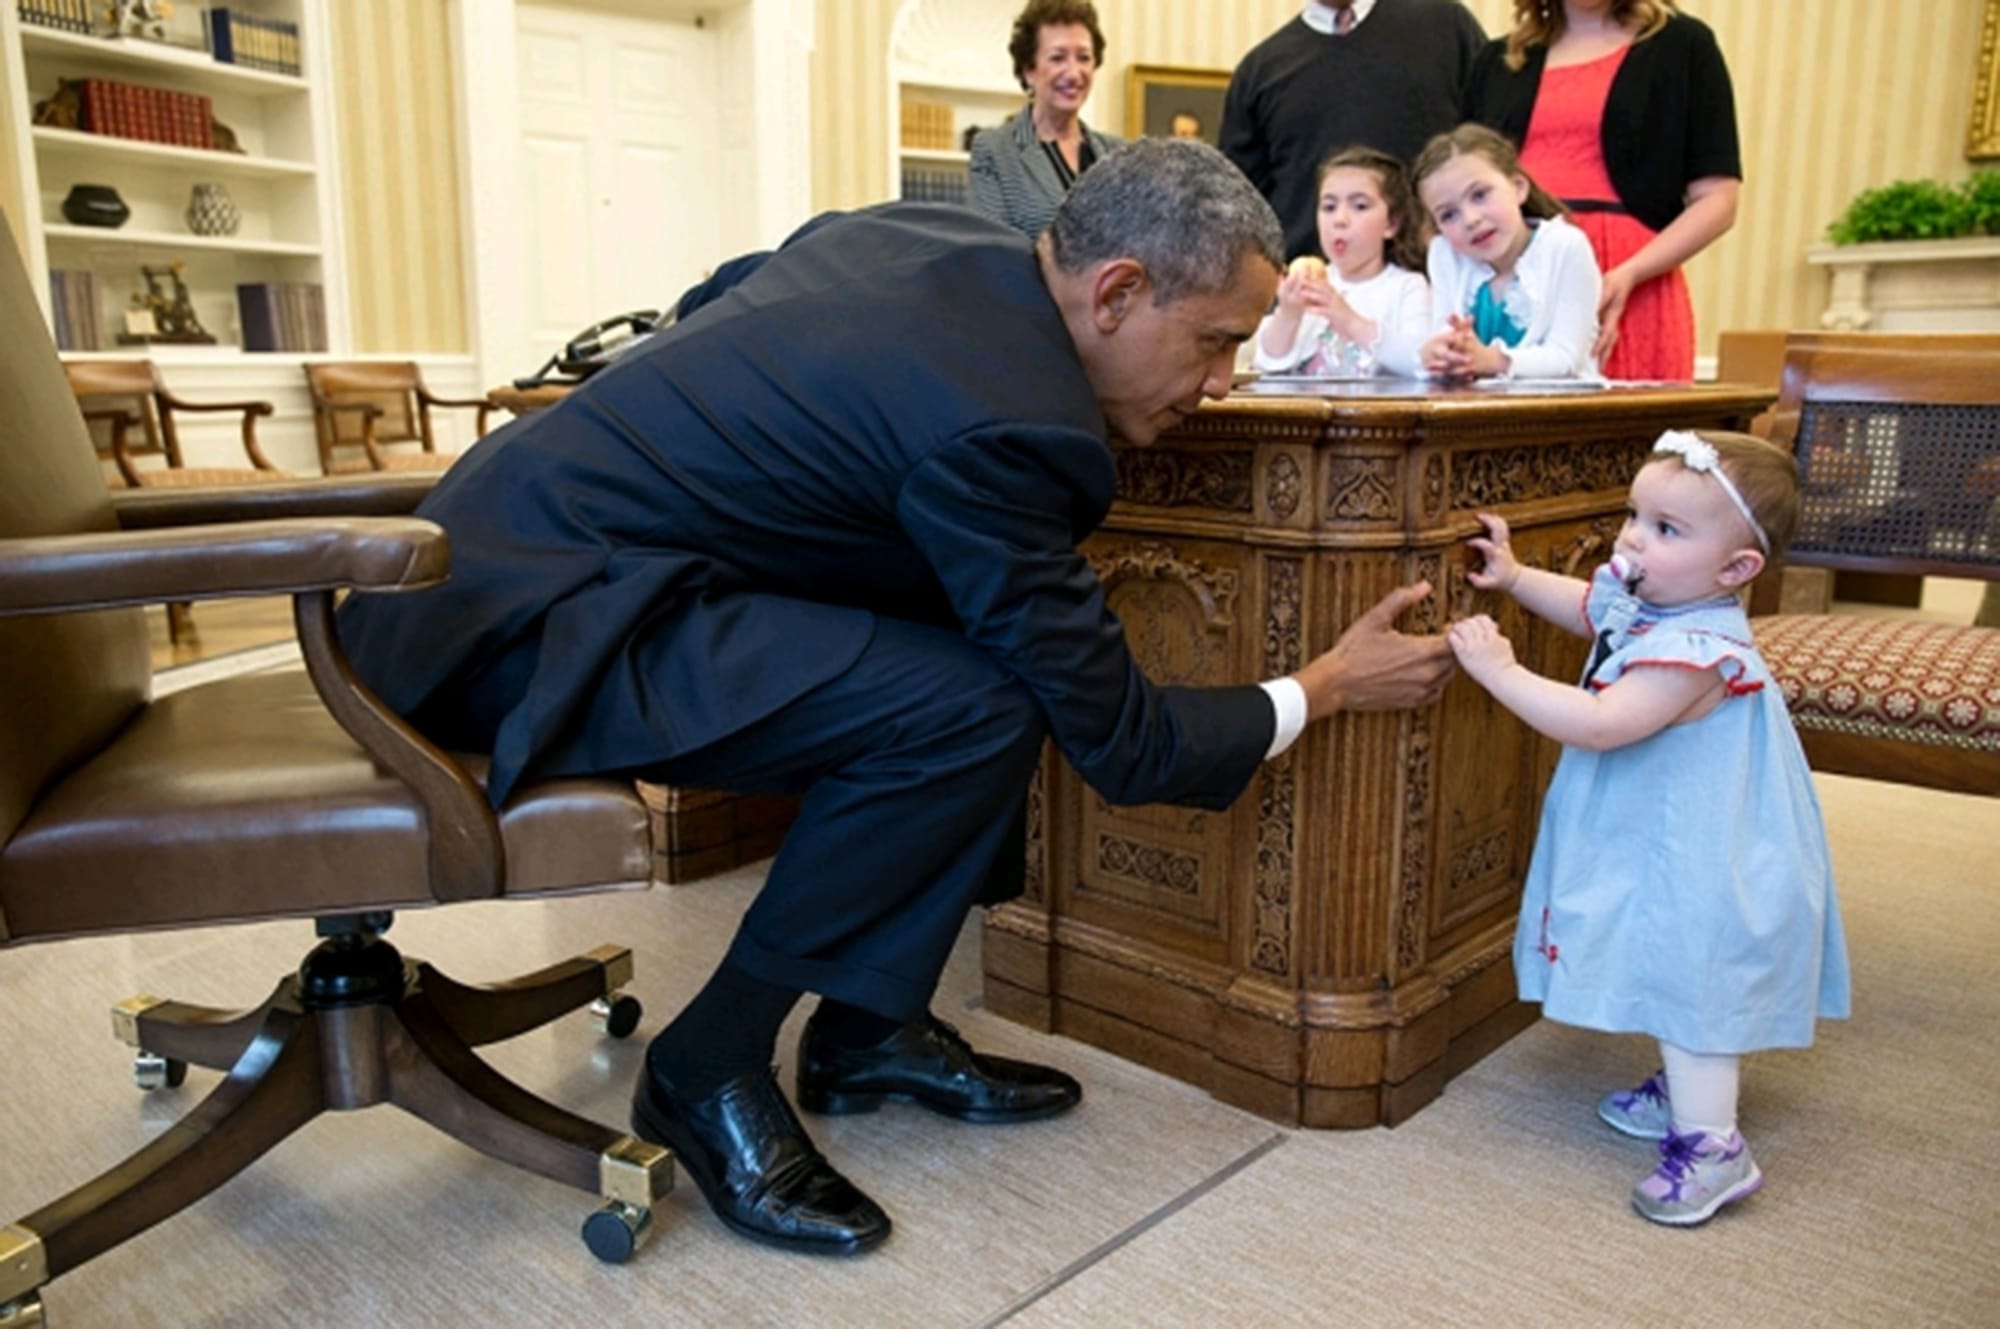 Pete Souza/Official White House photo
President Barack Obama holds the hand of Lincoln Rose Pierce Smith, the daughter of Jamie Smith, former deputy press secretary, in the Oval Office. Watching are her cousins Sage and Elsa Smith, daughters of David Smith and Bethany Rivard, a teacher Fort Vancouver High School.